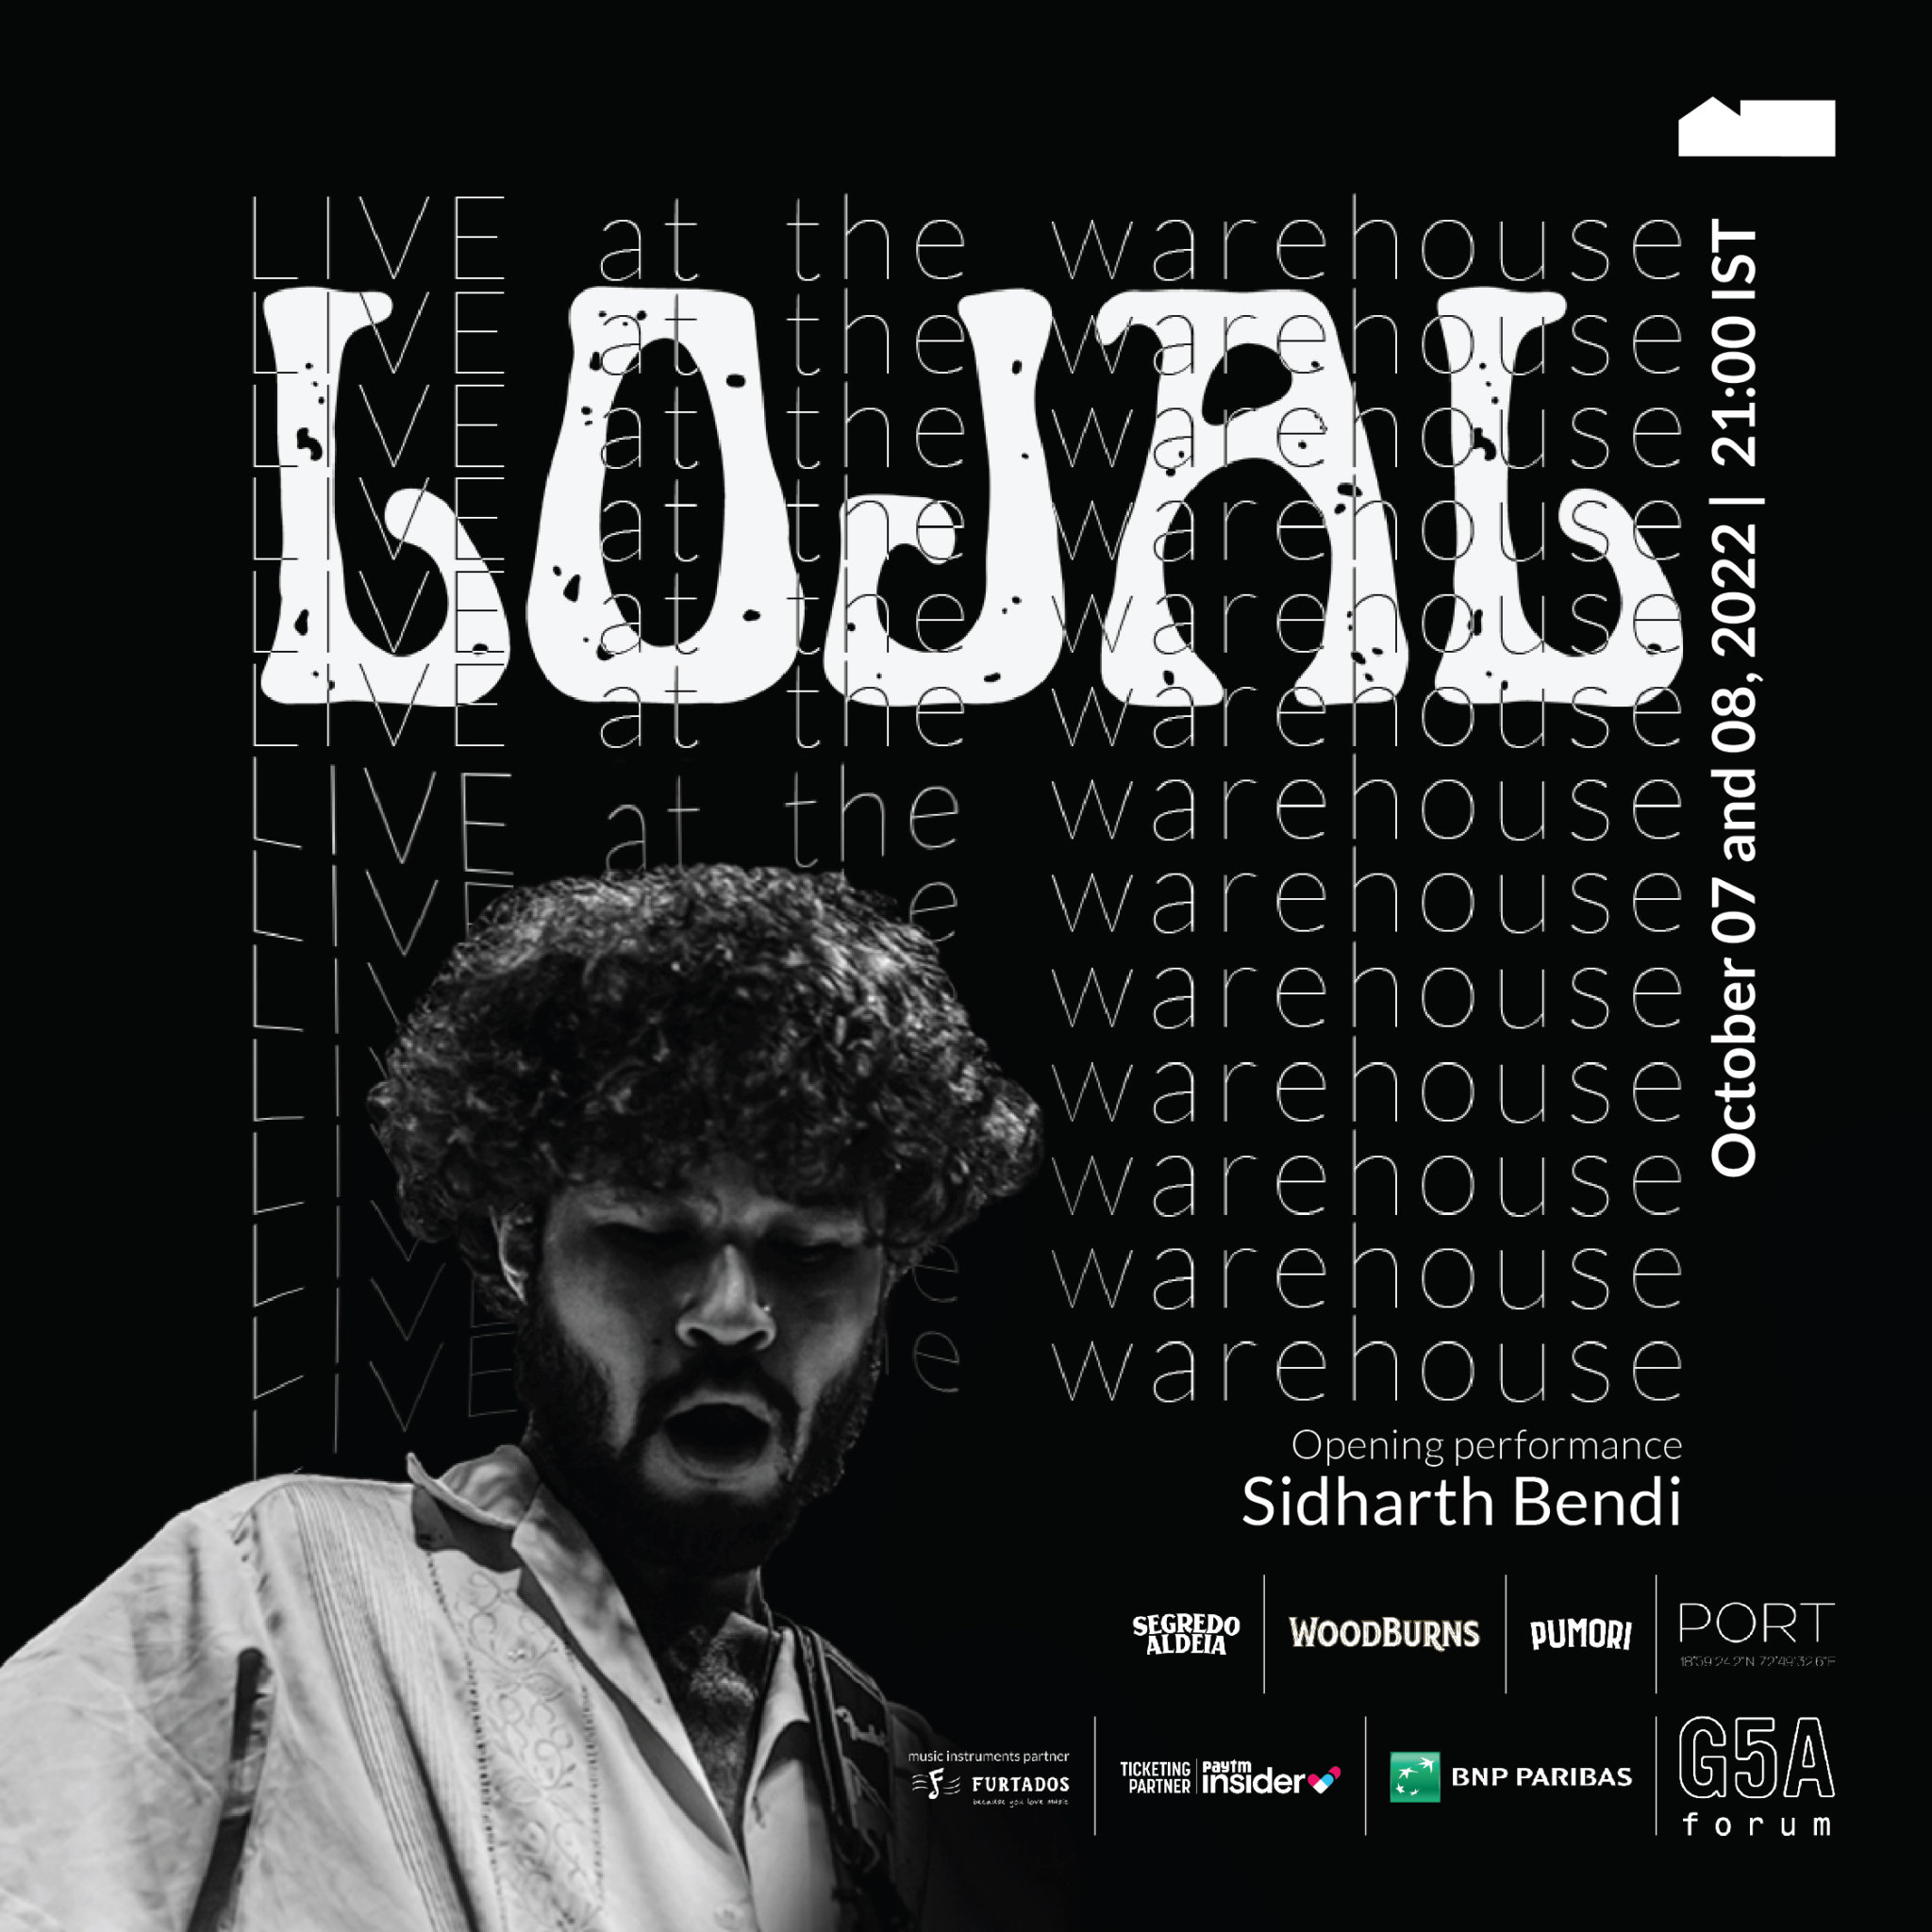 LOJAL Live at the warehouse